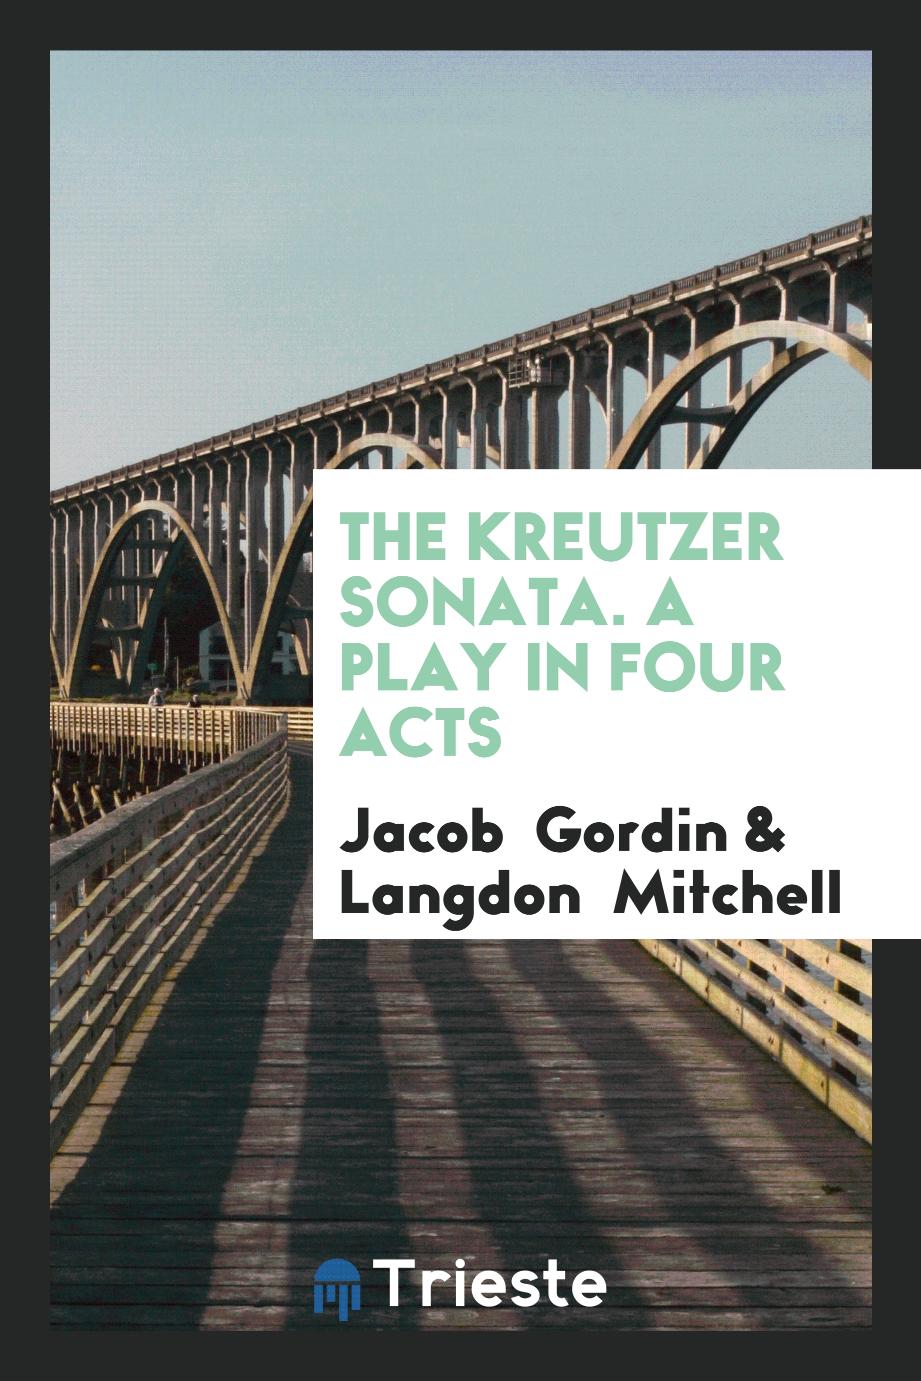 The Kreutzer Sonata. A play in four acts